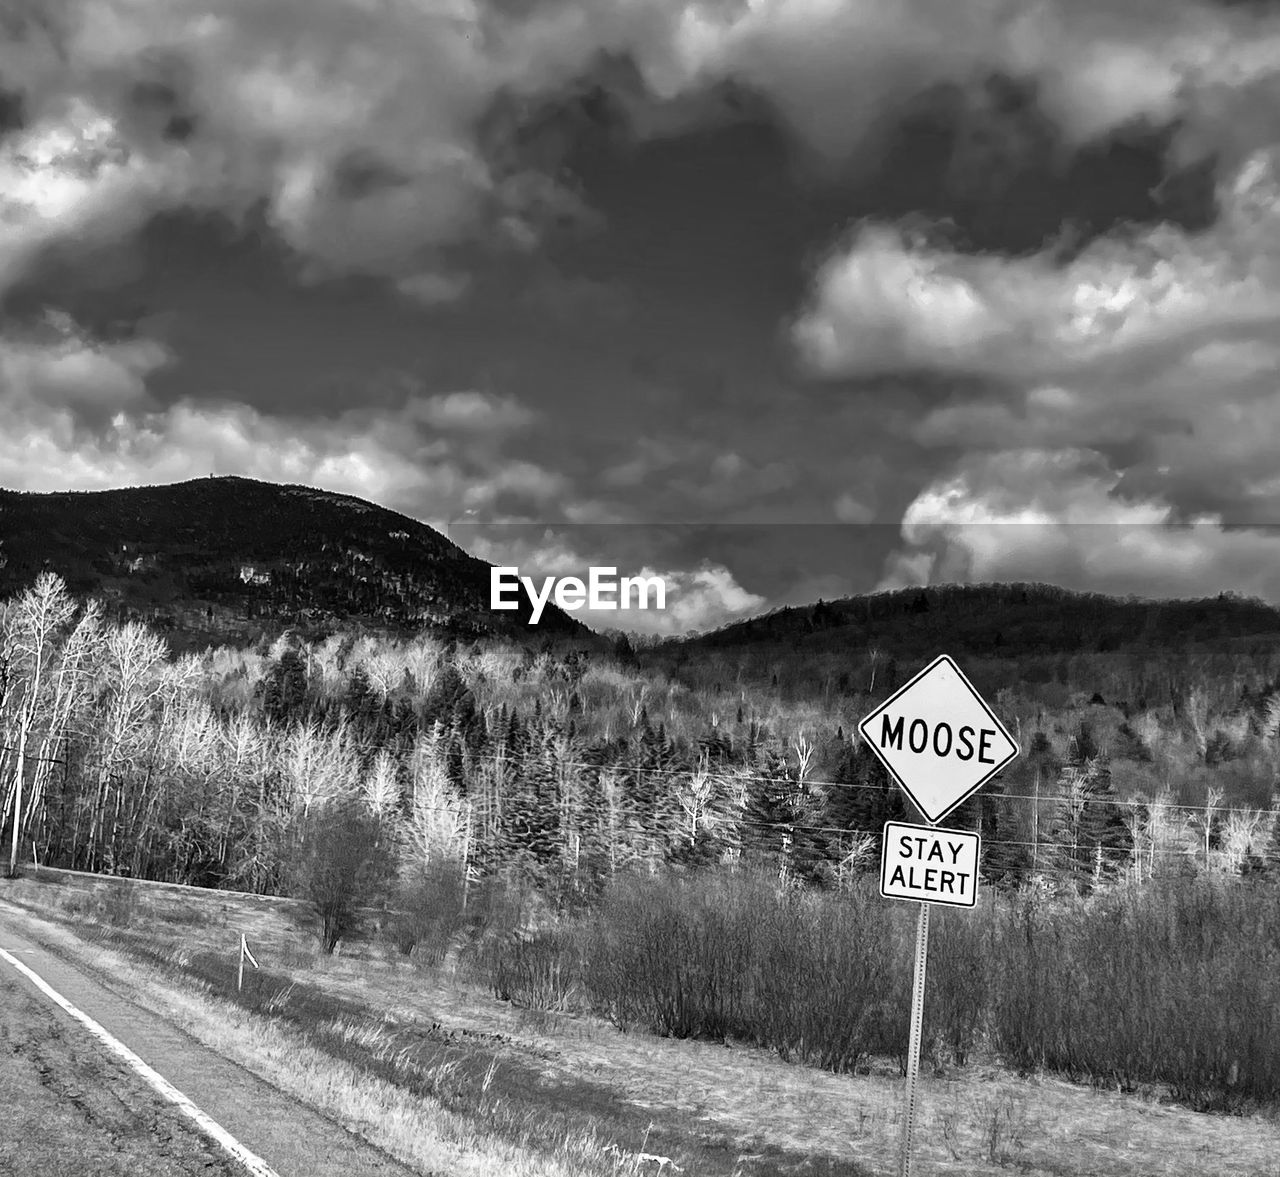 sign, road, communication, road sign, black and white, cloud, sky, monochrome photography, guidance, transportation, warning sign, monochrome, text, western script, no people, nature, symbol, plant, rural area, information sign, landscape, mountain, tree, day, environment, infrastructure, stop sign, arrow symbol, scenics - nature, land, non-urban scene, outdoors, speed limit sign, highway, directional sign, traffic arrow sign, the way forward, tranquil scene, beauty in nature